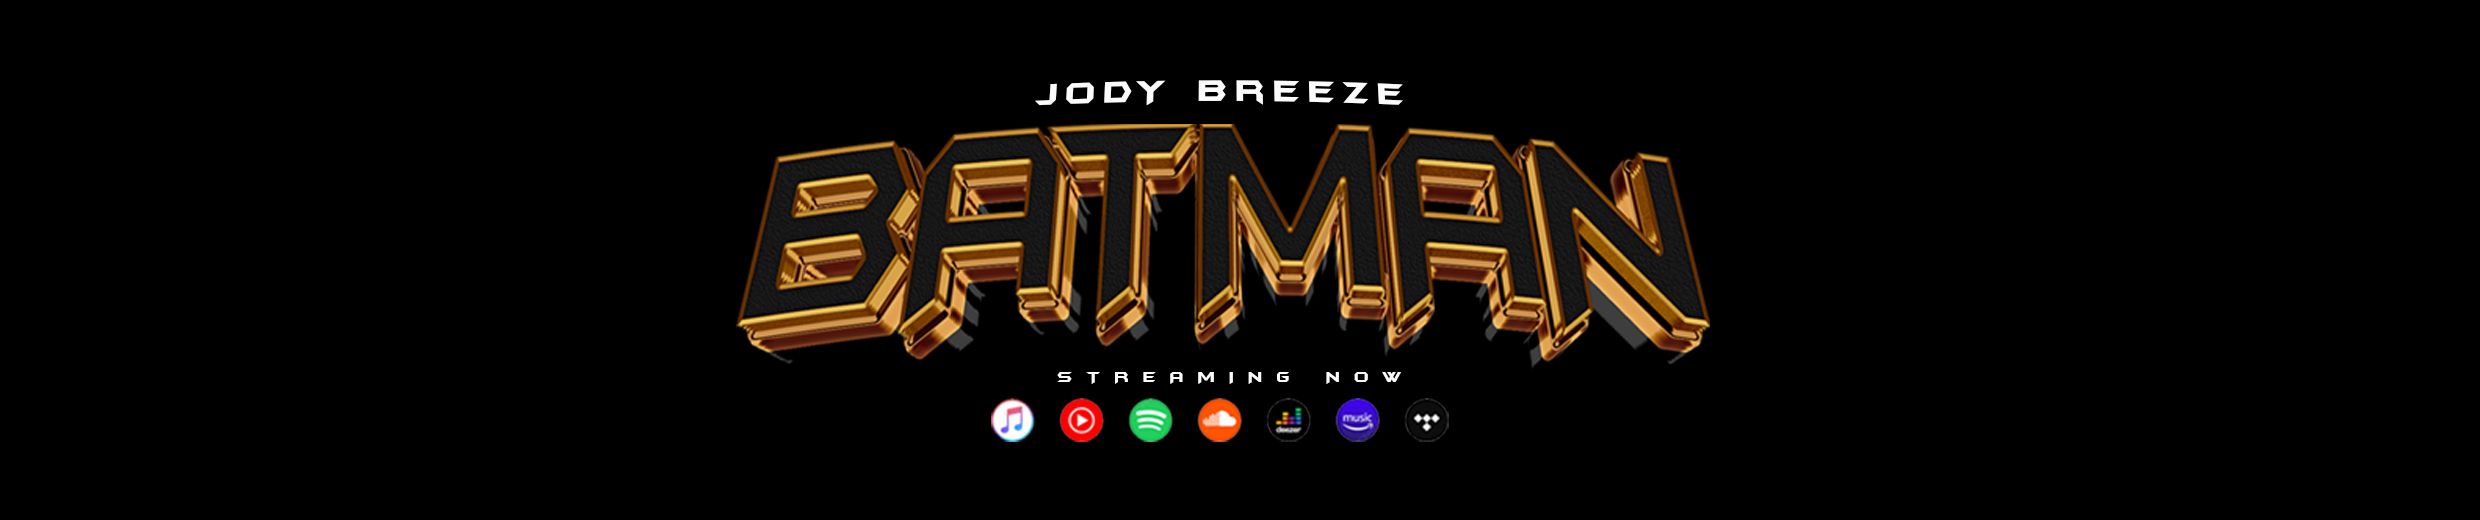 Stream Jody Breeze music Listen to songs, albums, playlists for free on SoundCloud